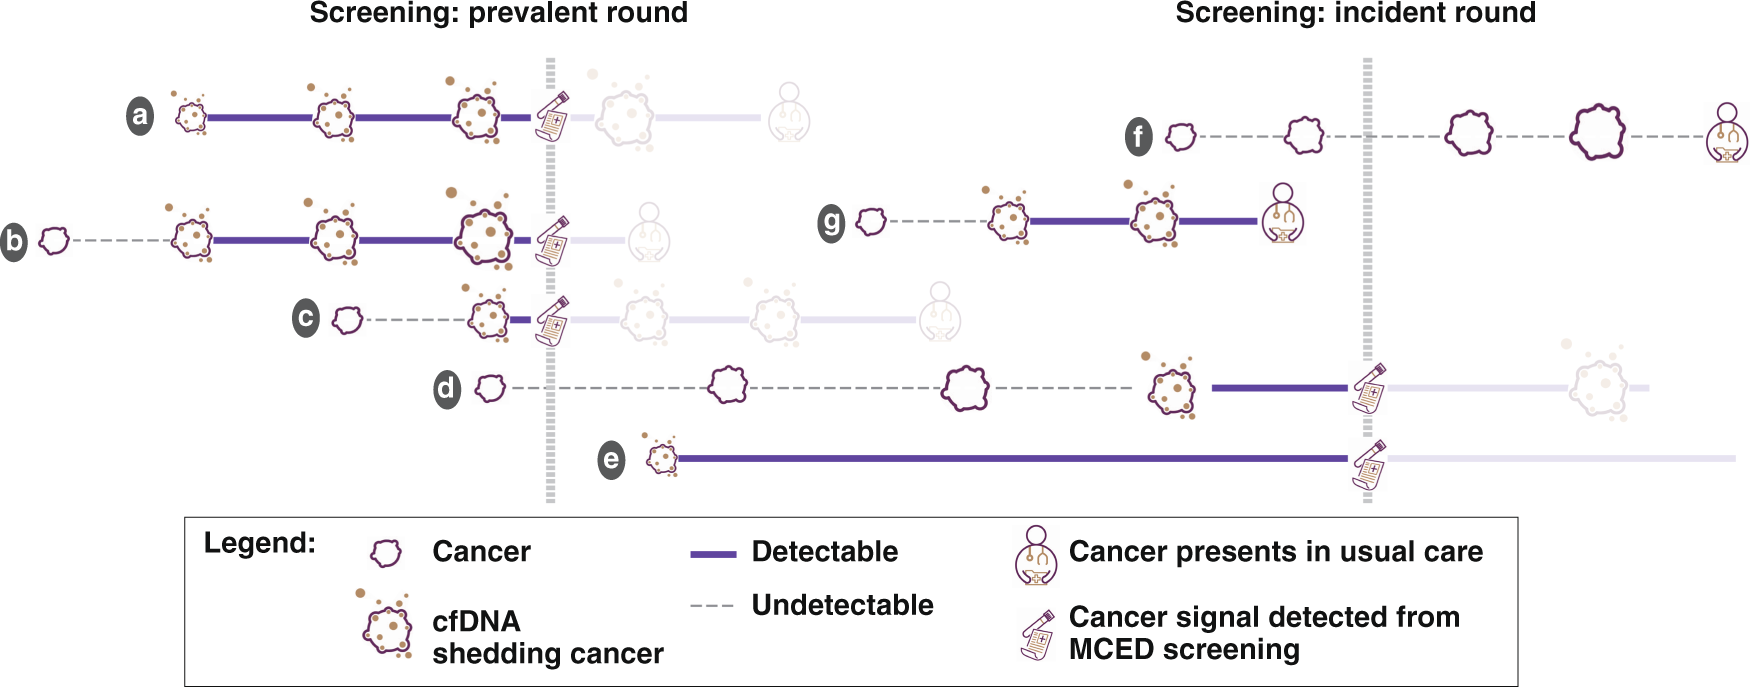 Modelled mortality benefits of multi-cancer early detection